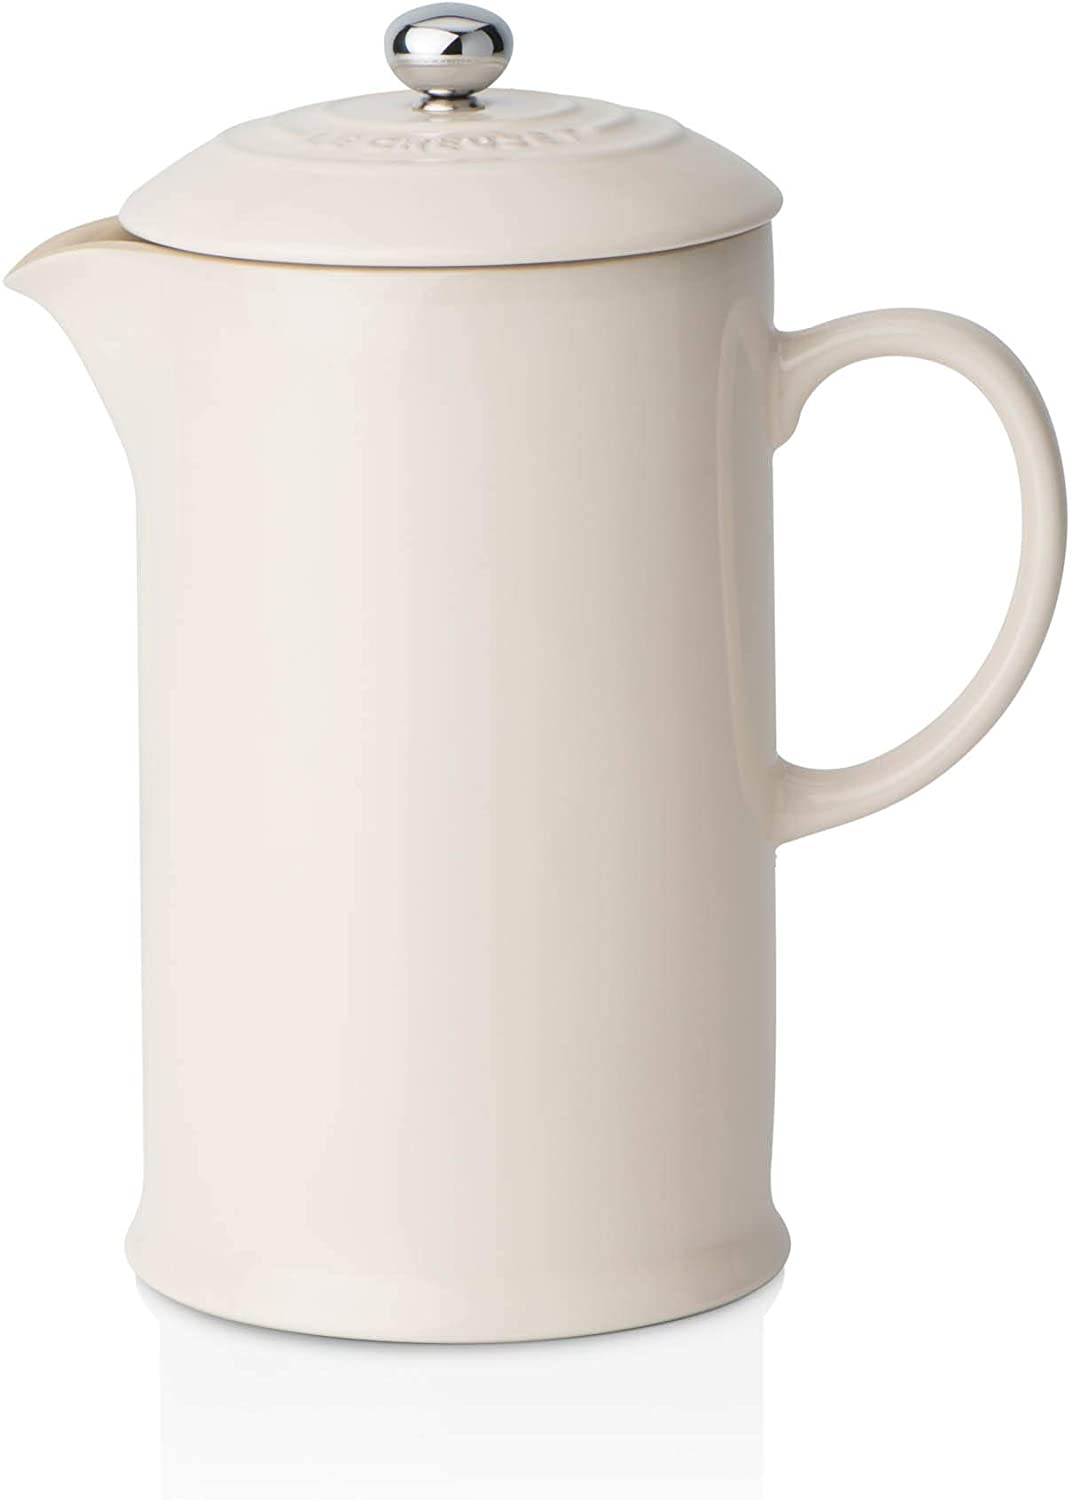 Le Creuset French Press Coffee Maker with Stainless Steel Press Insert 800 ml Stoneware, cream, 800 ml